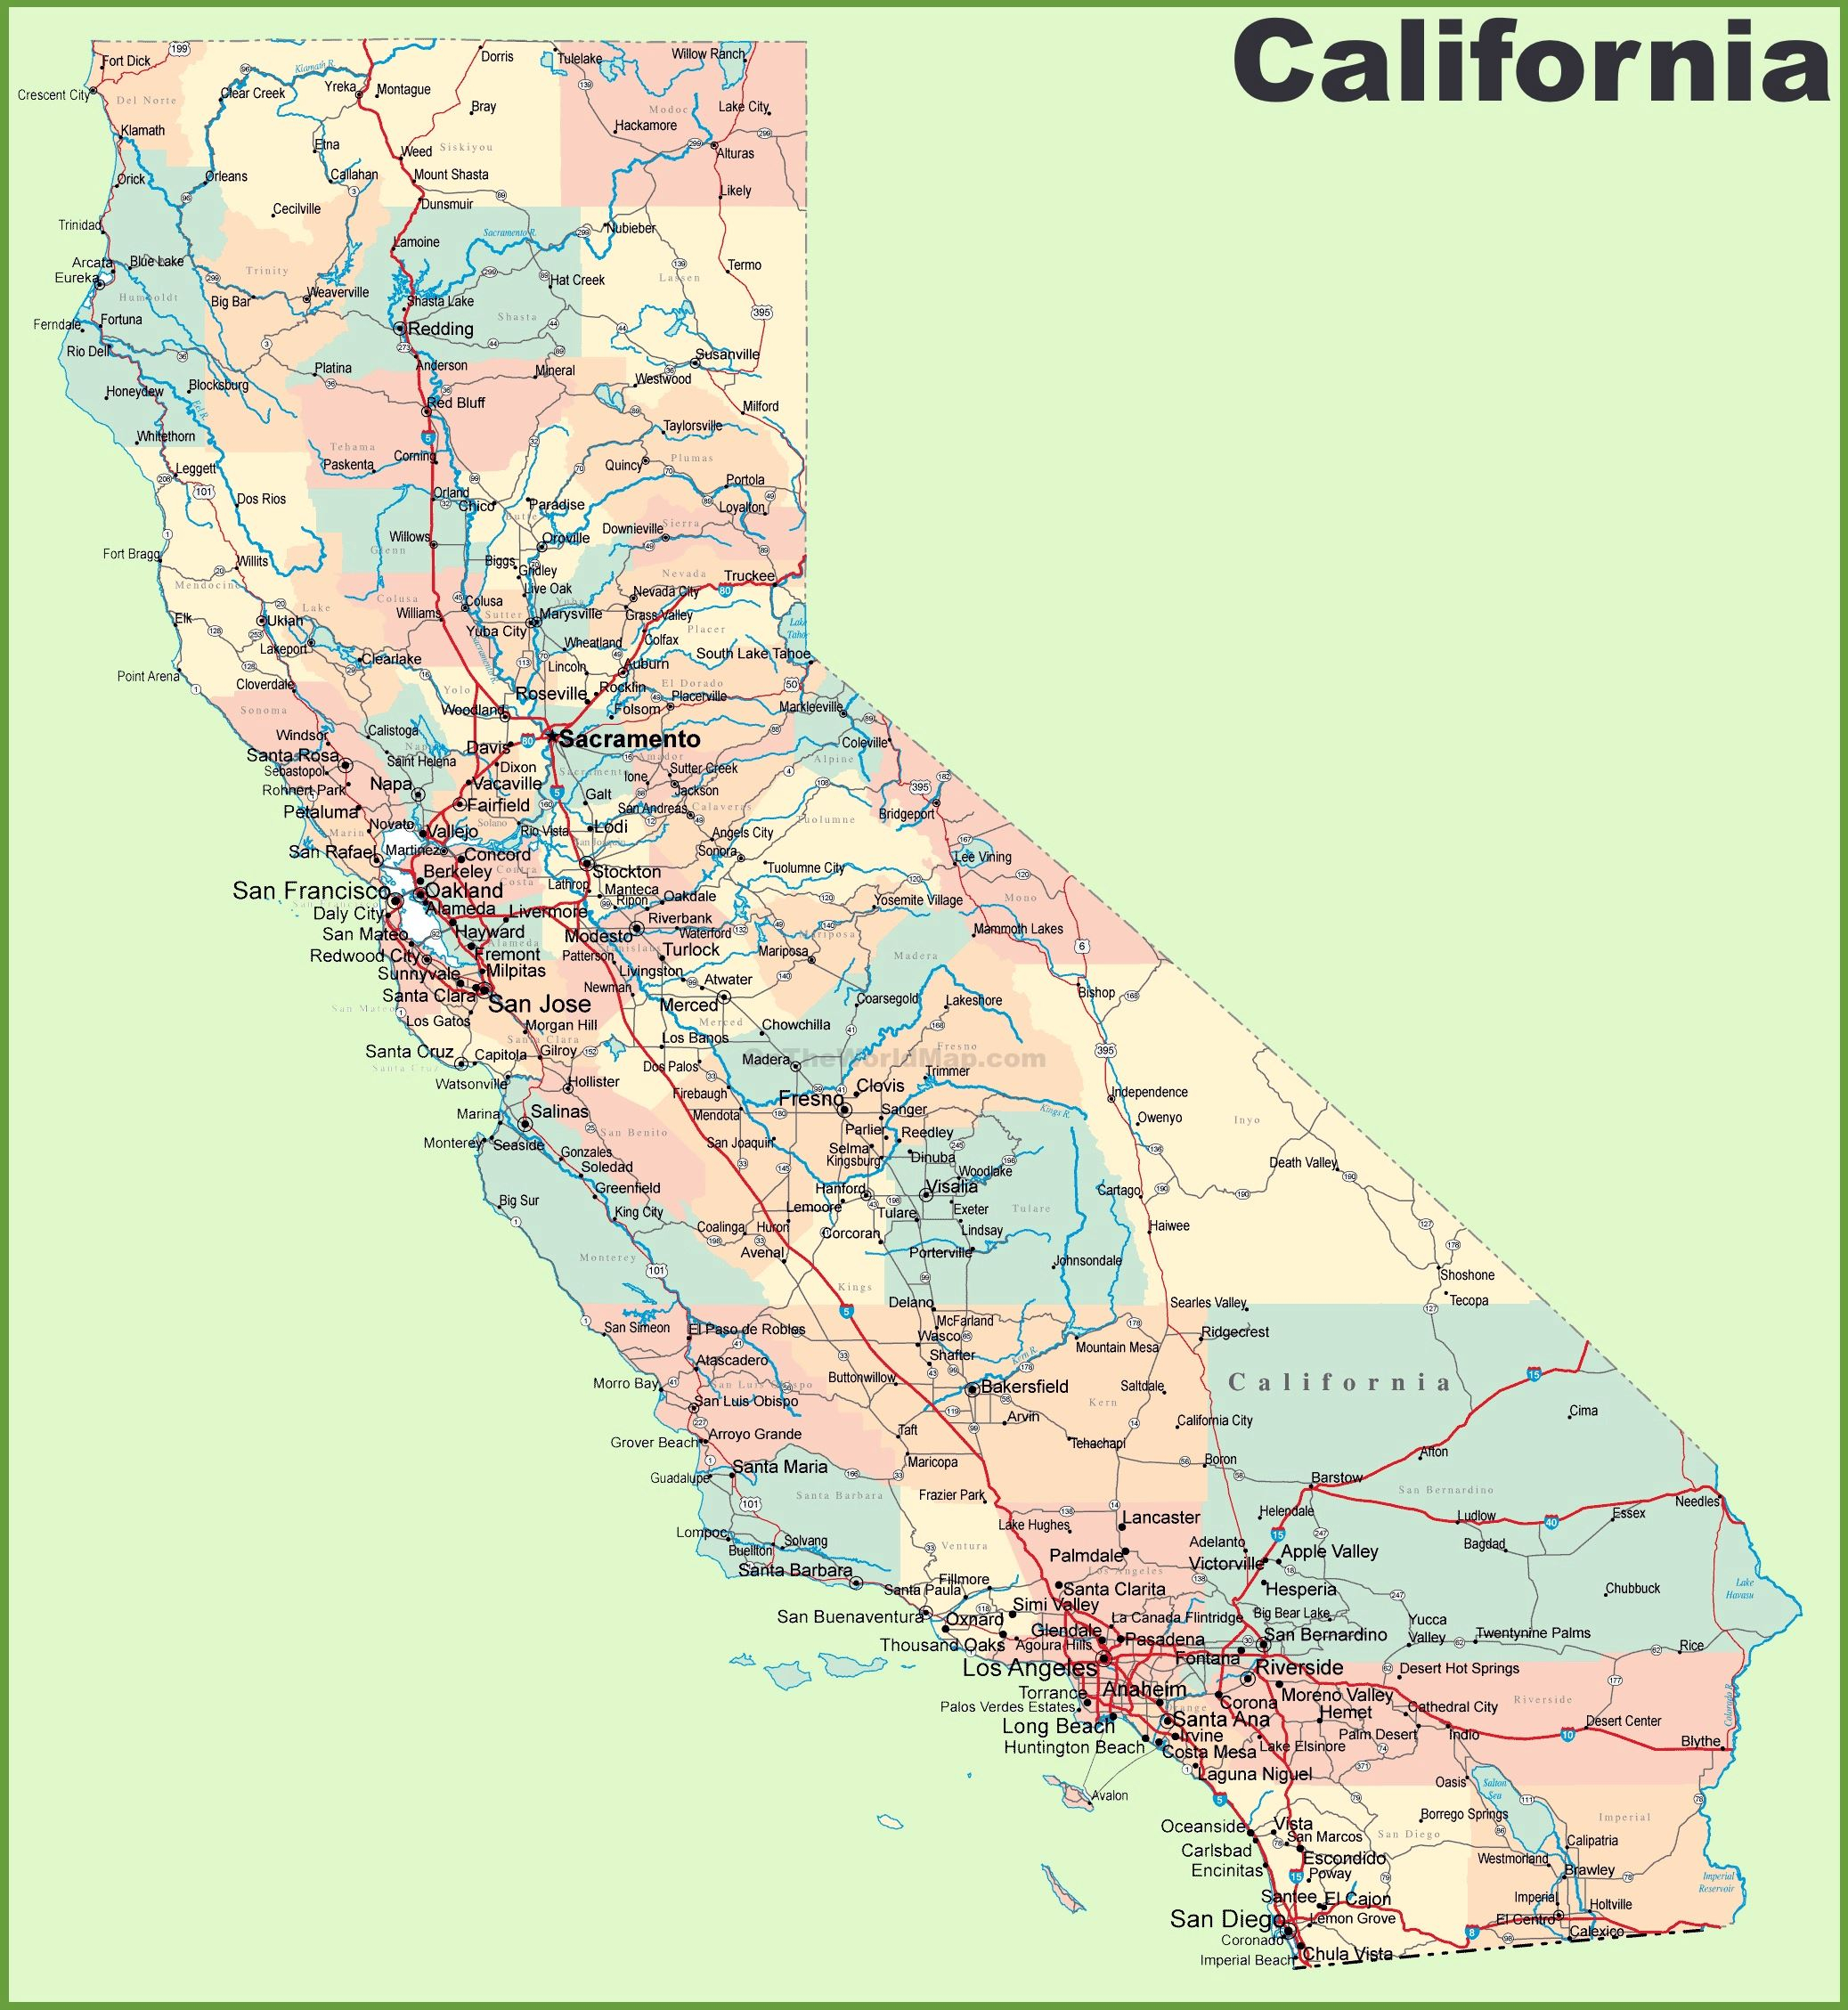 Large California Maps For Free Download And Print | High-Resolution - Picture Of California Map